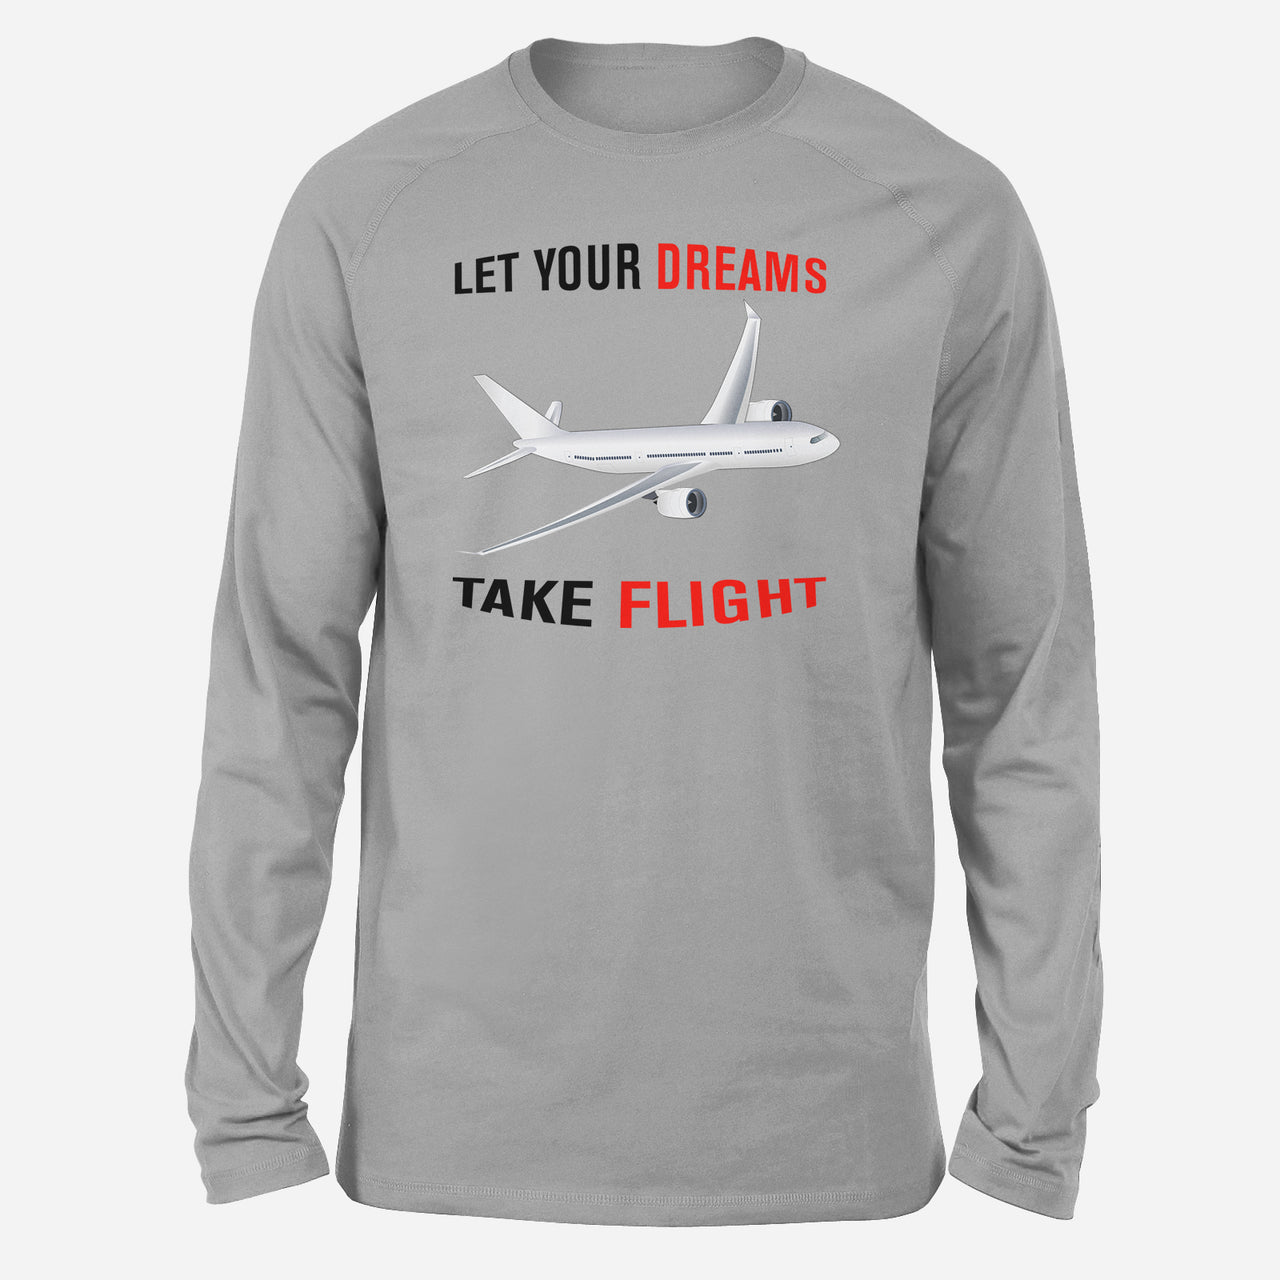 Let Your Dreams Take Flight Designed Long-Sleeve T-Shirts